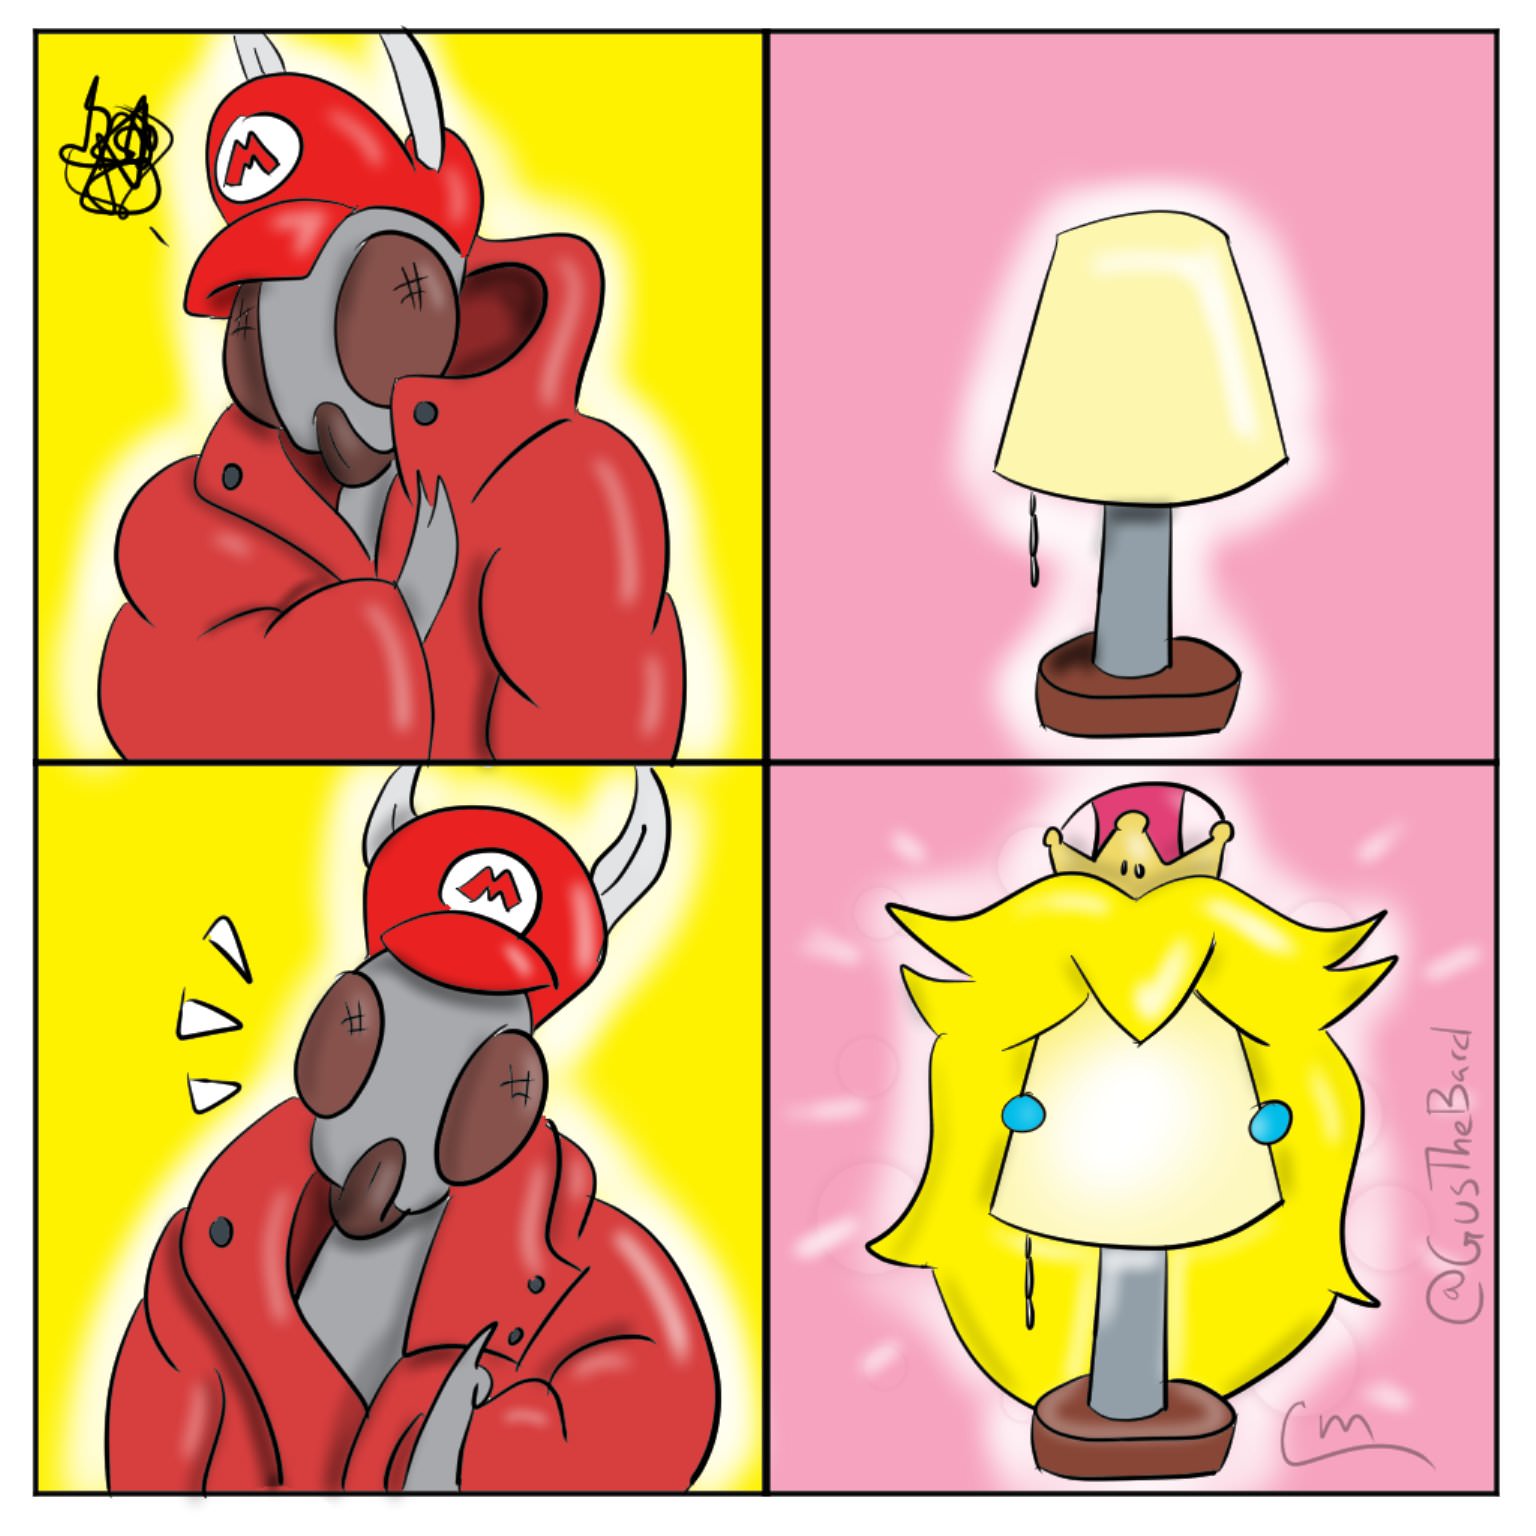 Comic of a moth in mario clothing doing the drake meme where the moth prefers bowsette lamp over lamp